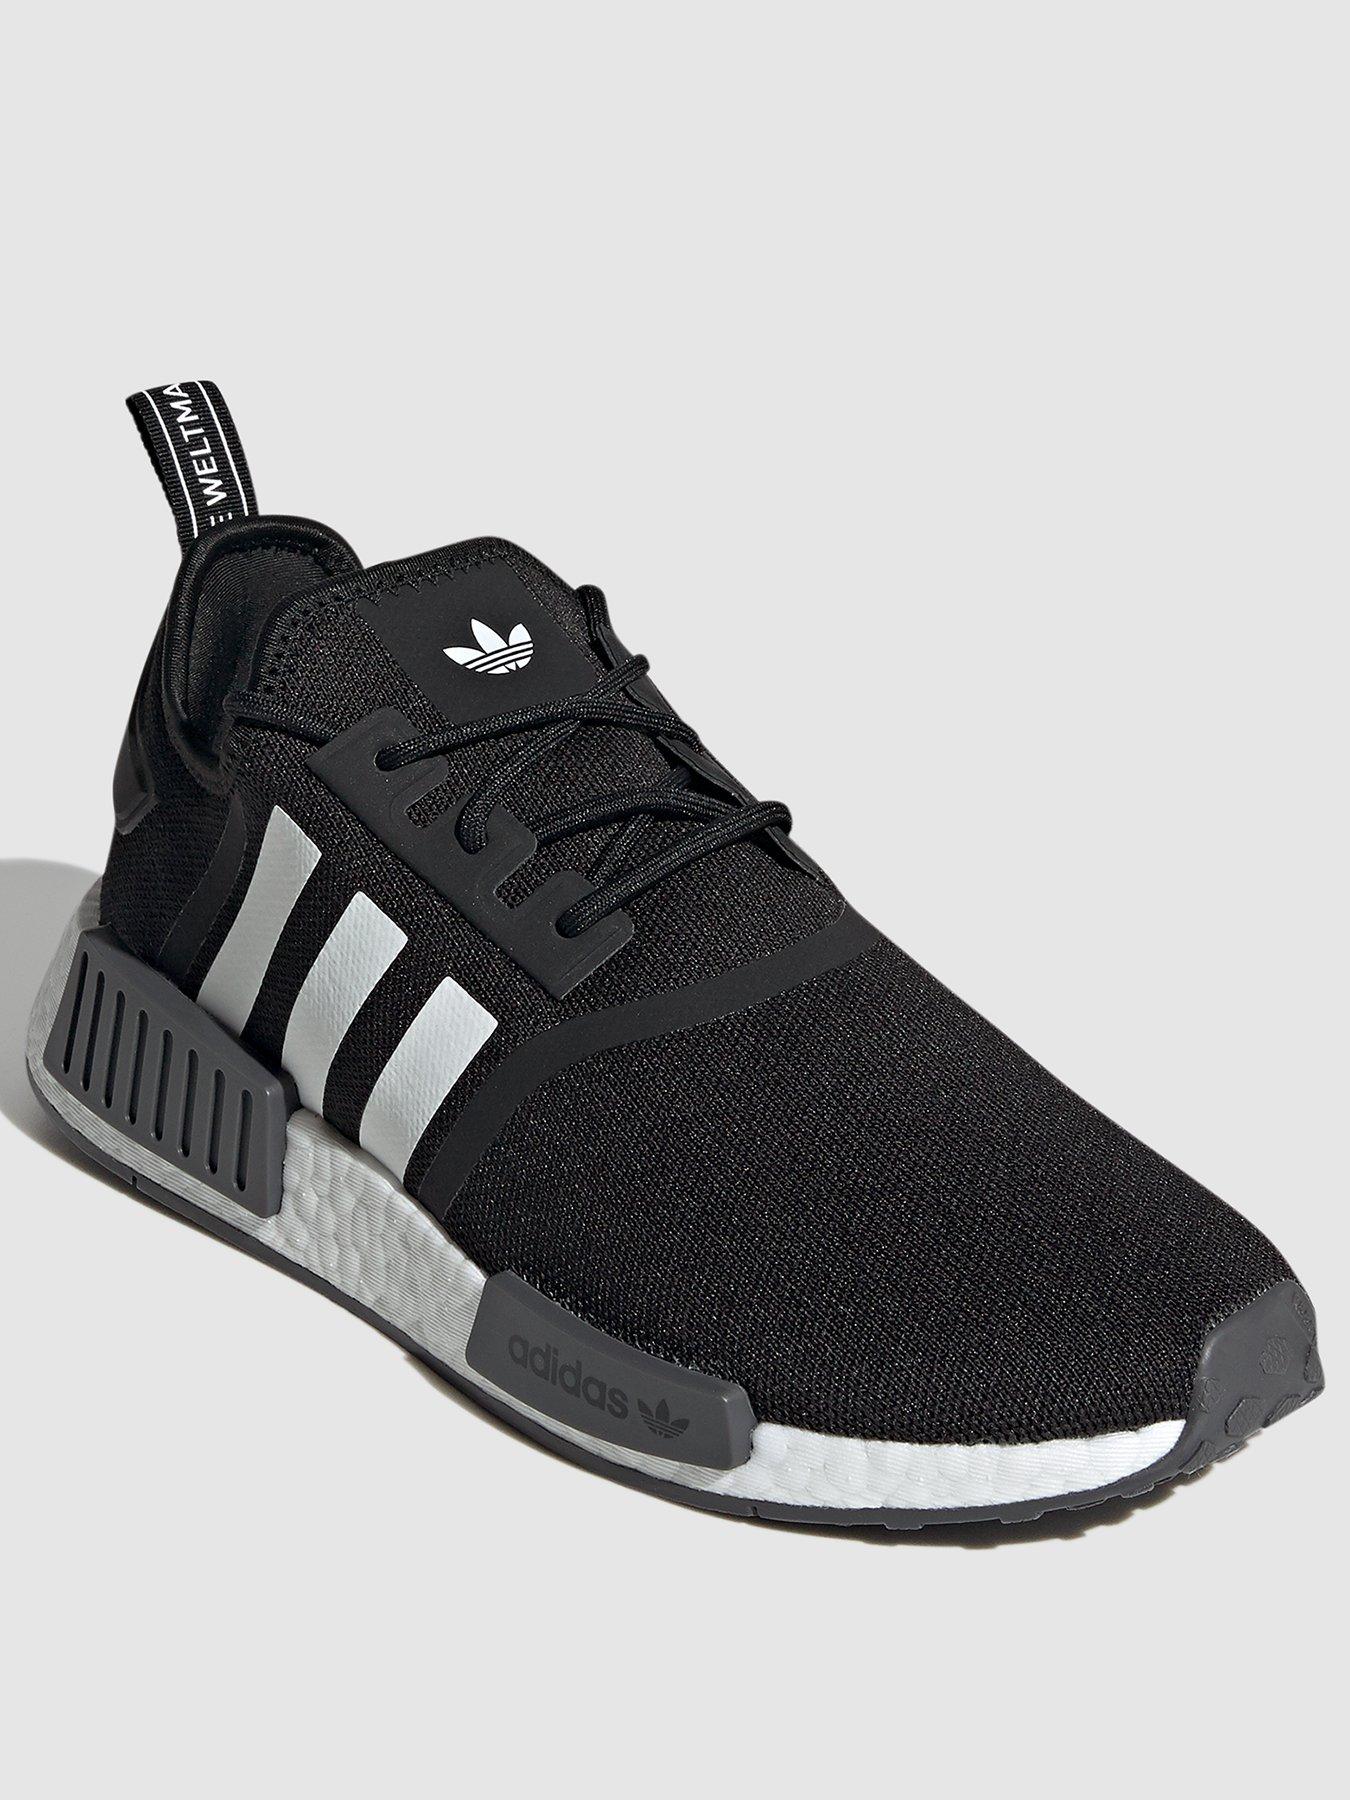 adidas Originals NMD | Mens trainers | Mens sports | Sports & leisure | www.very.co.uk